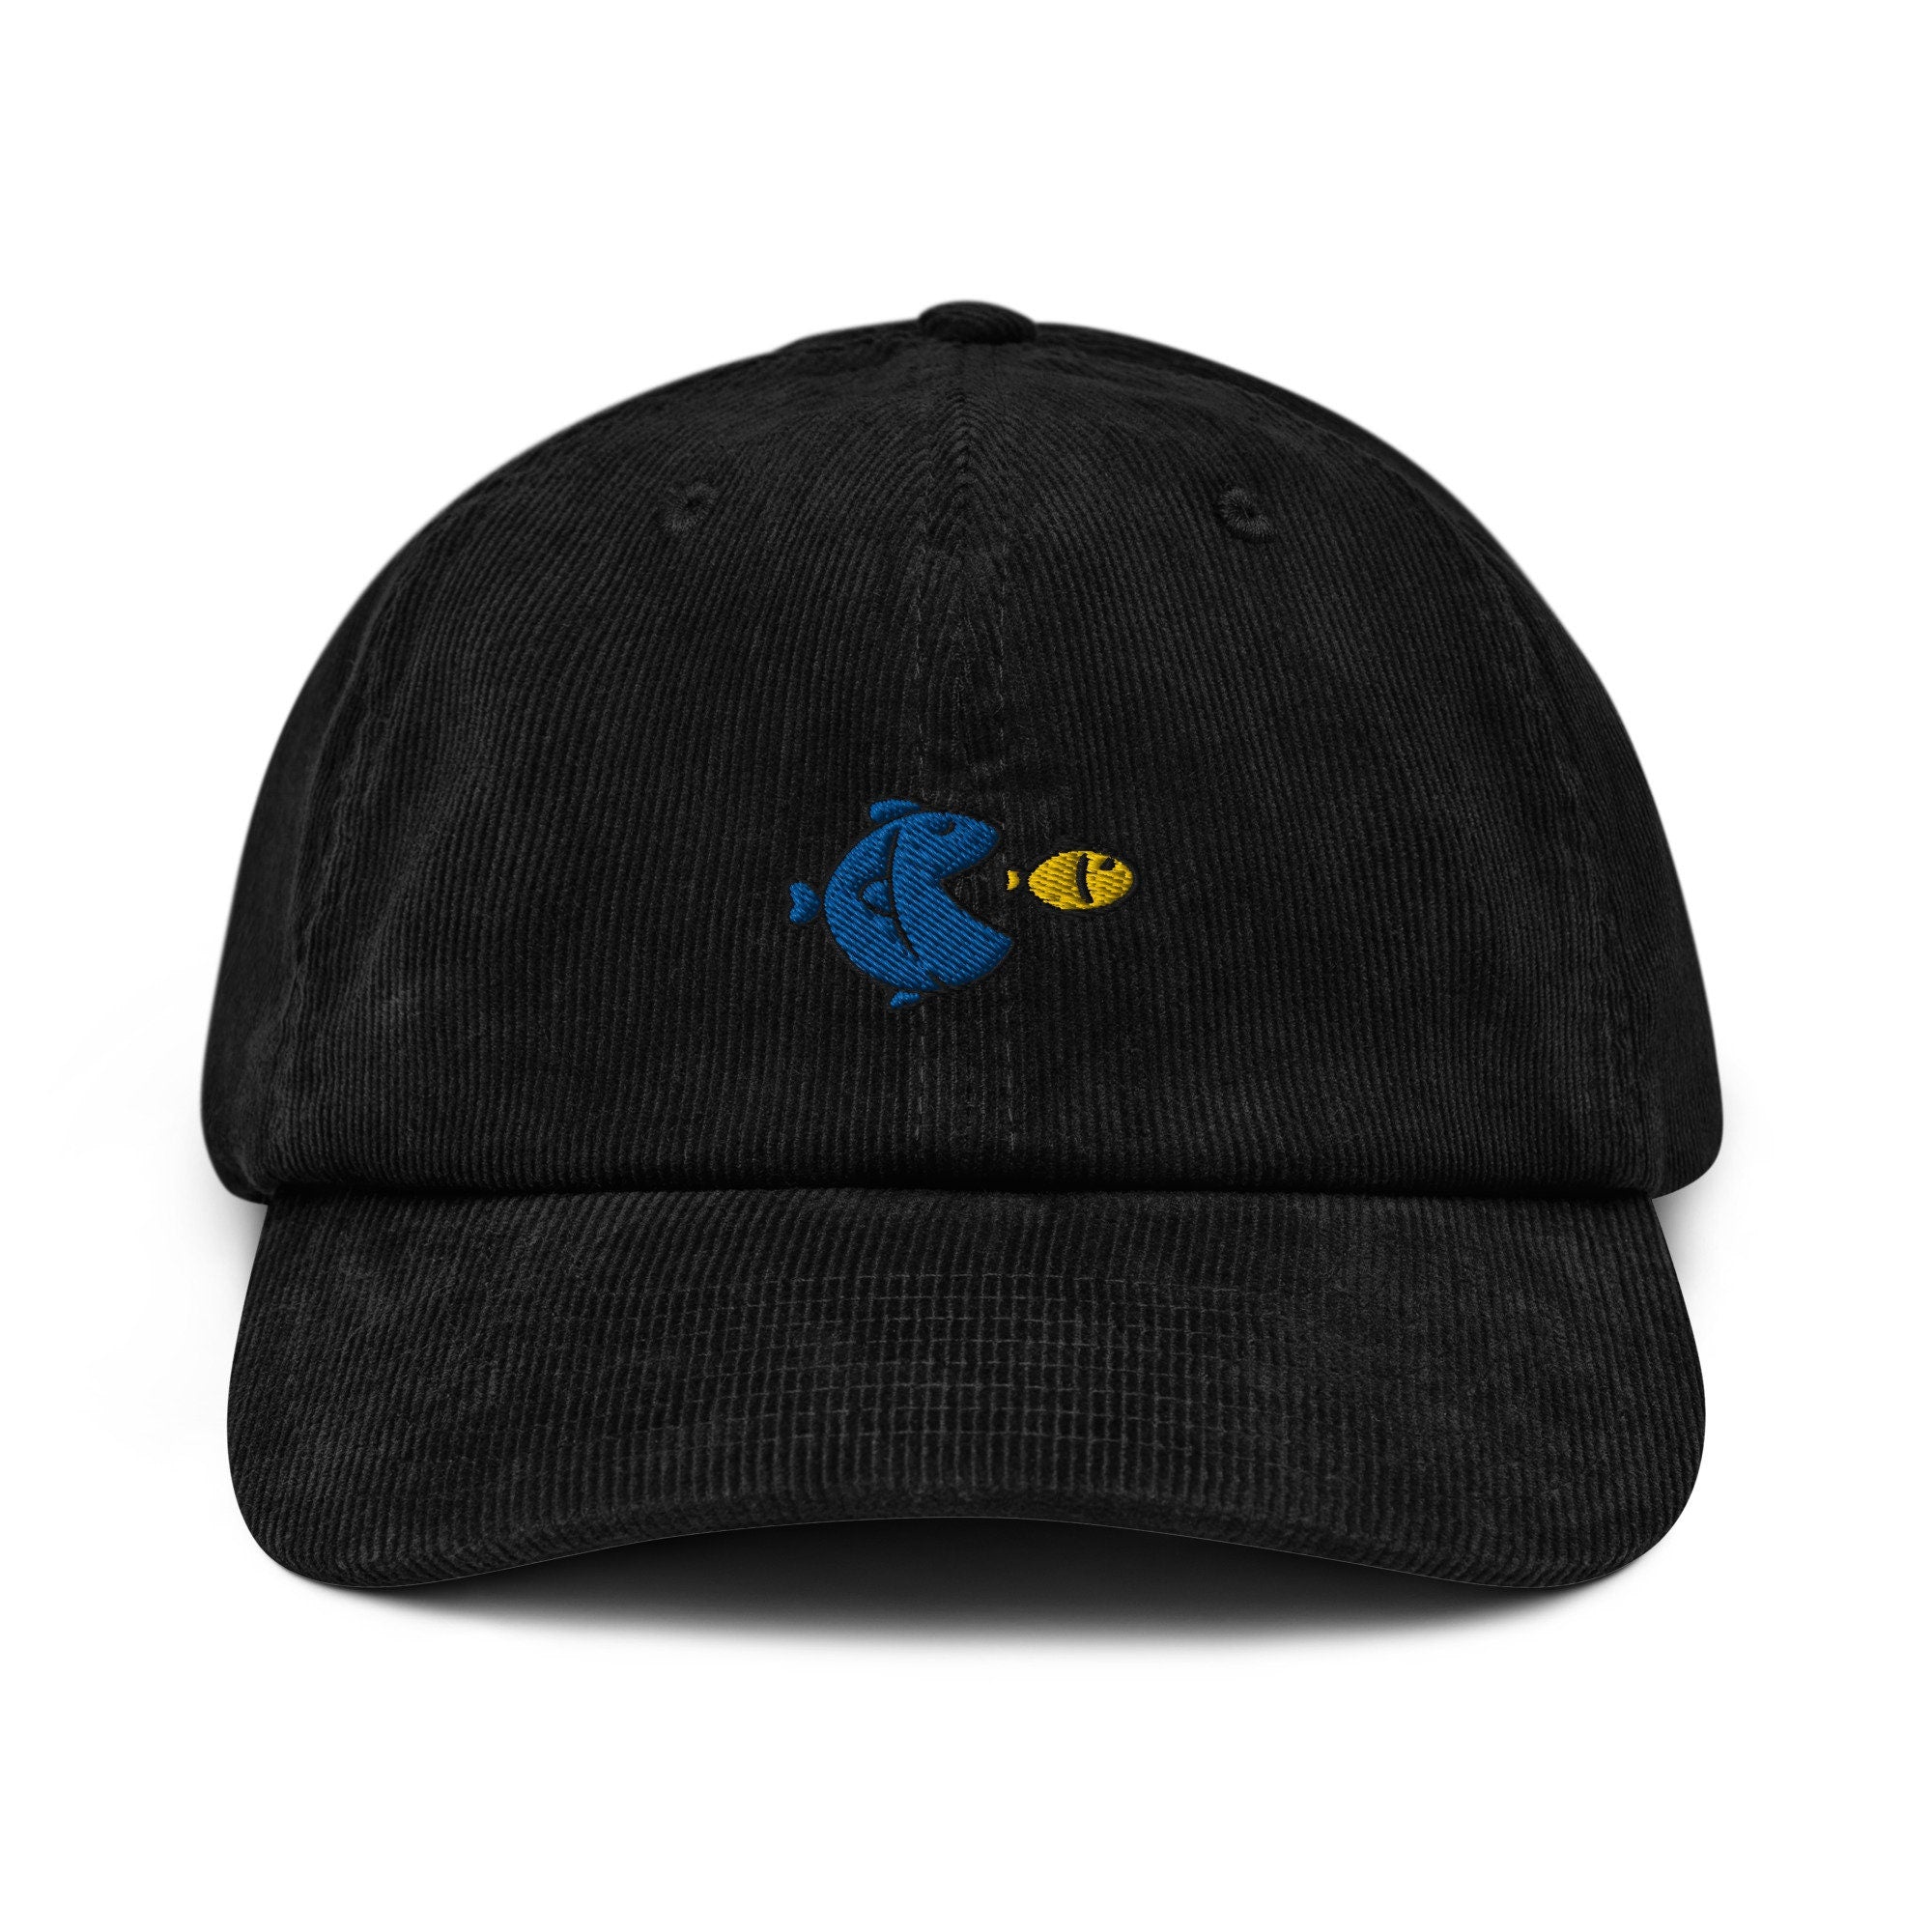 Capitalism Fish Corduroy Hat, Handmade Embroidered Corduroy Dad Cap - Multiple Colors